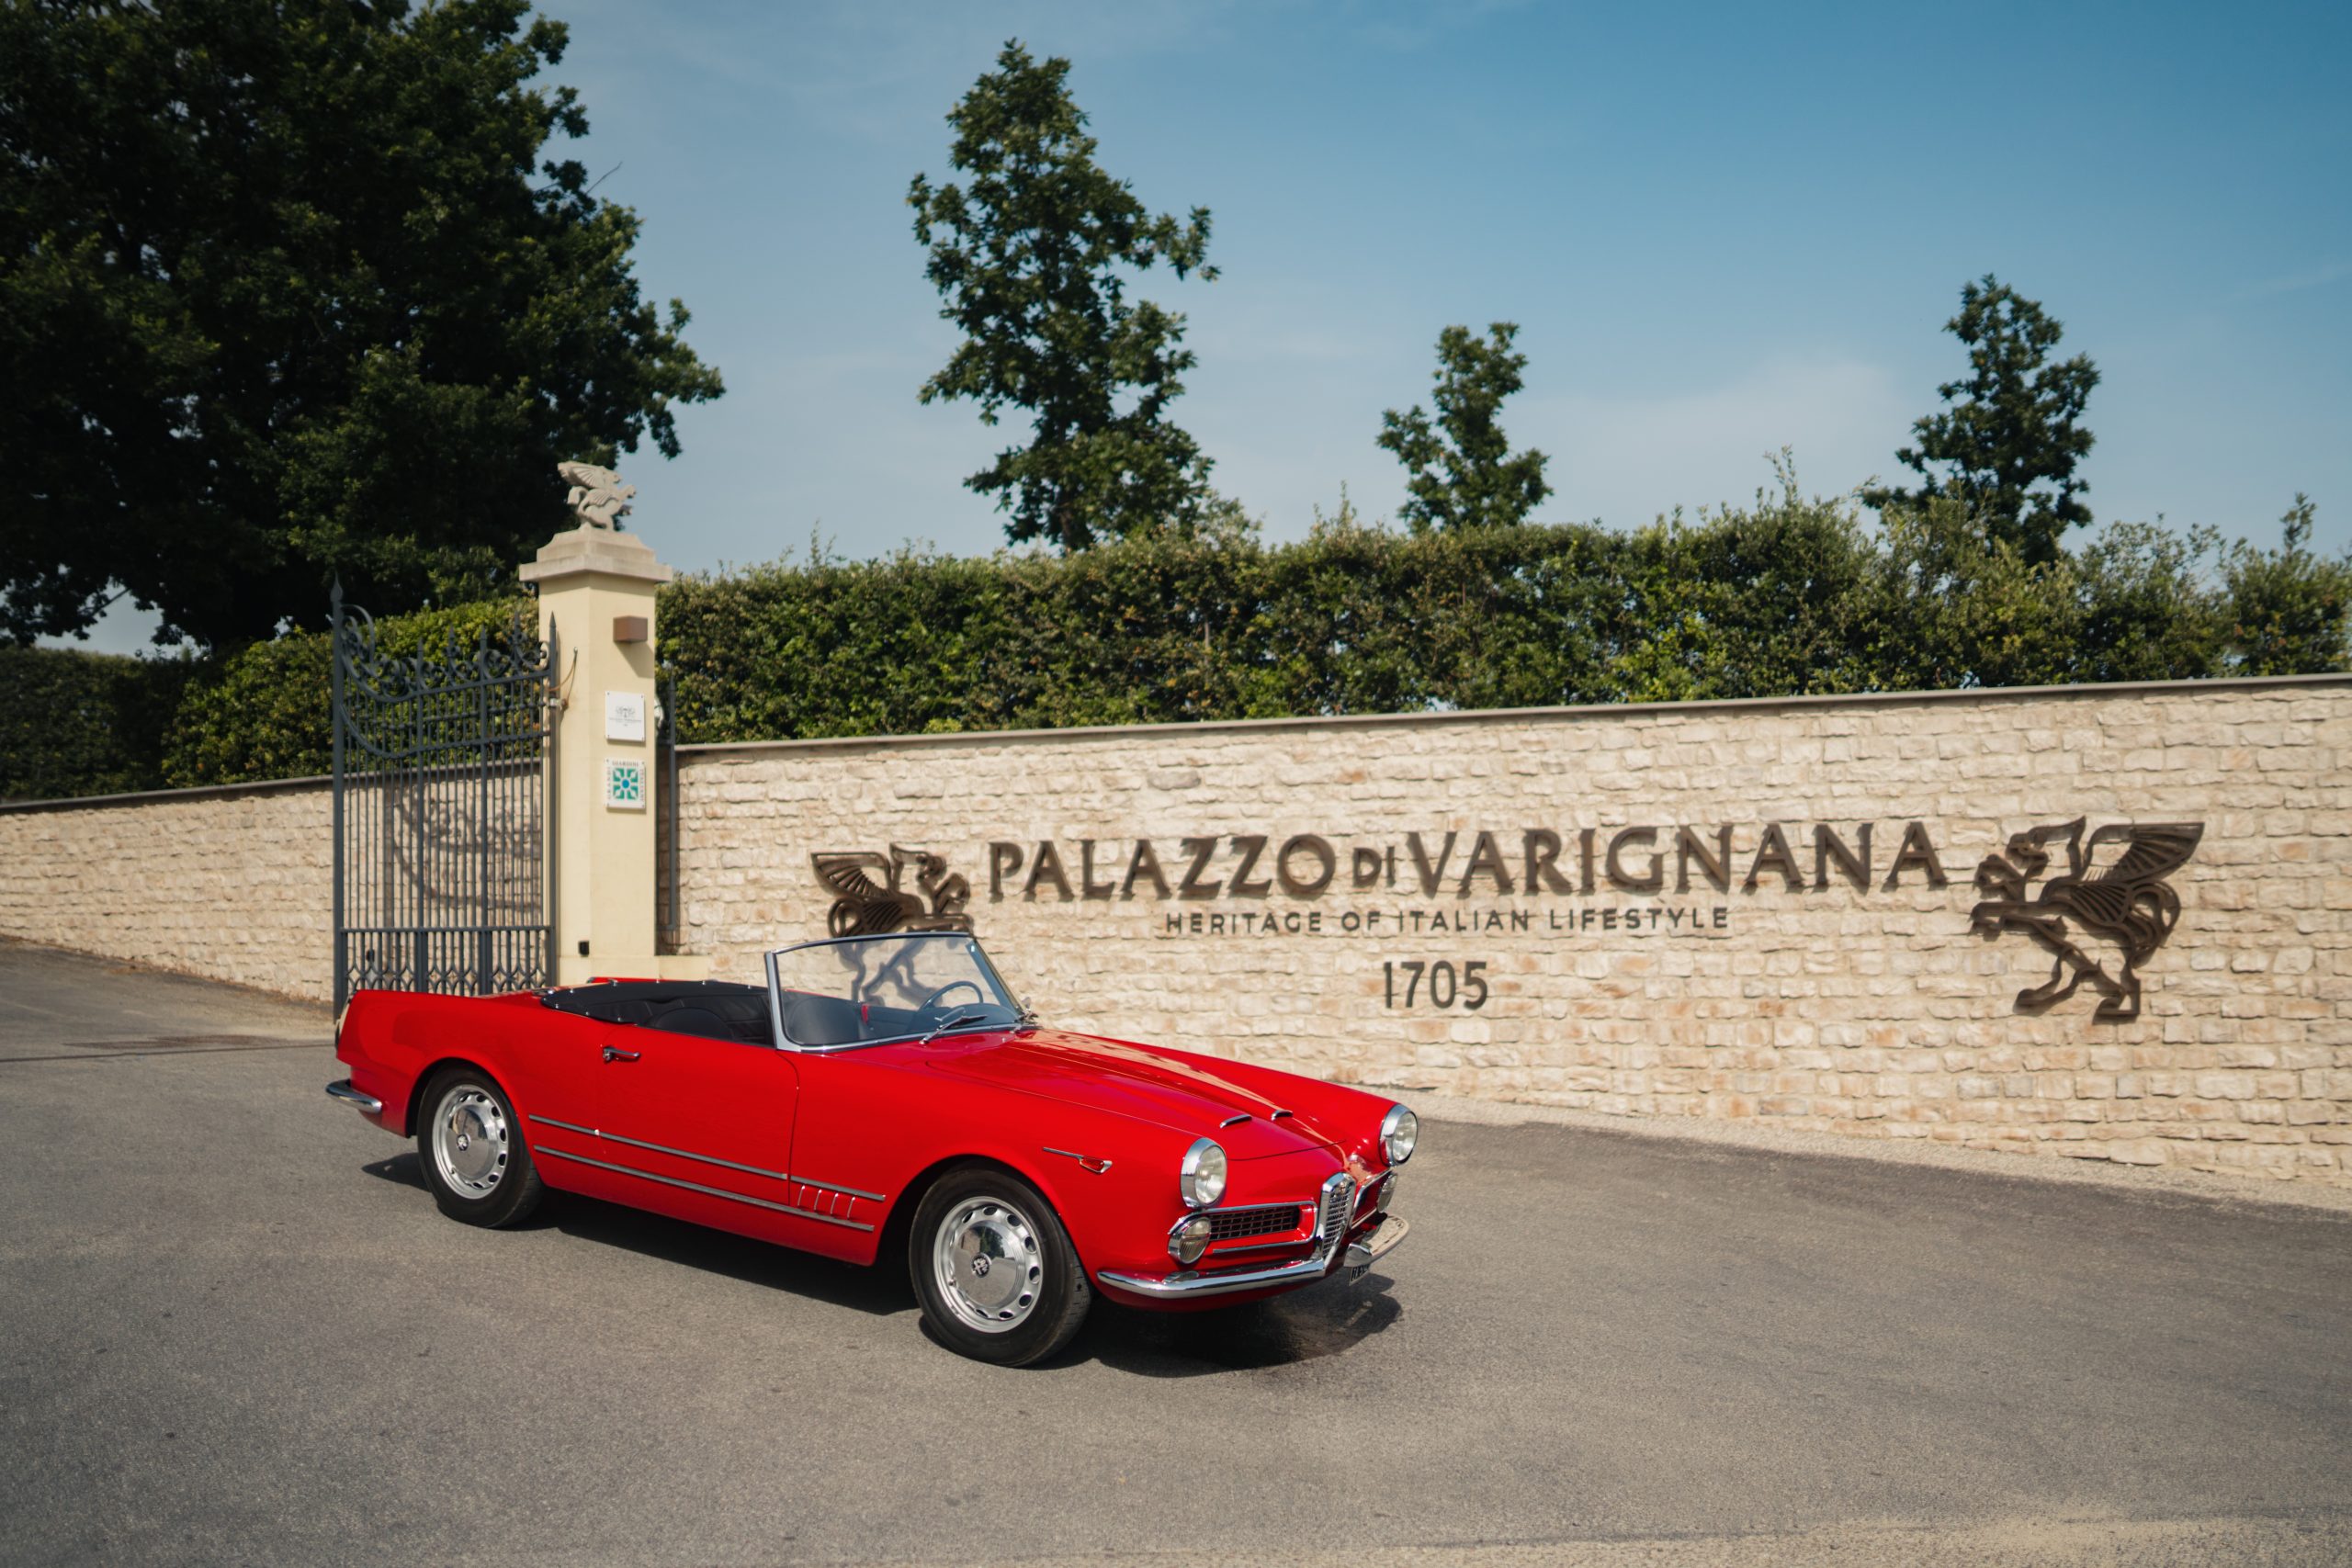 Italy’s Motor Valley is hosting the world’s most exclusive concours